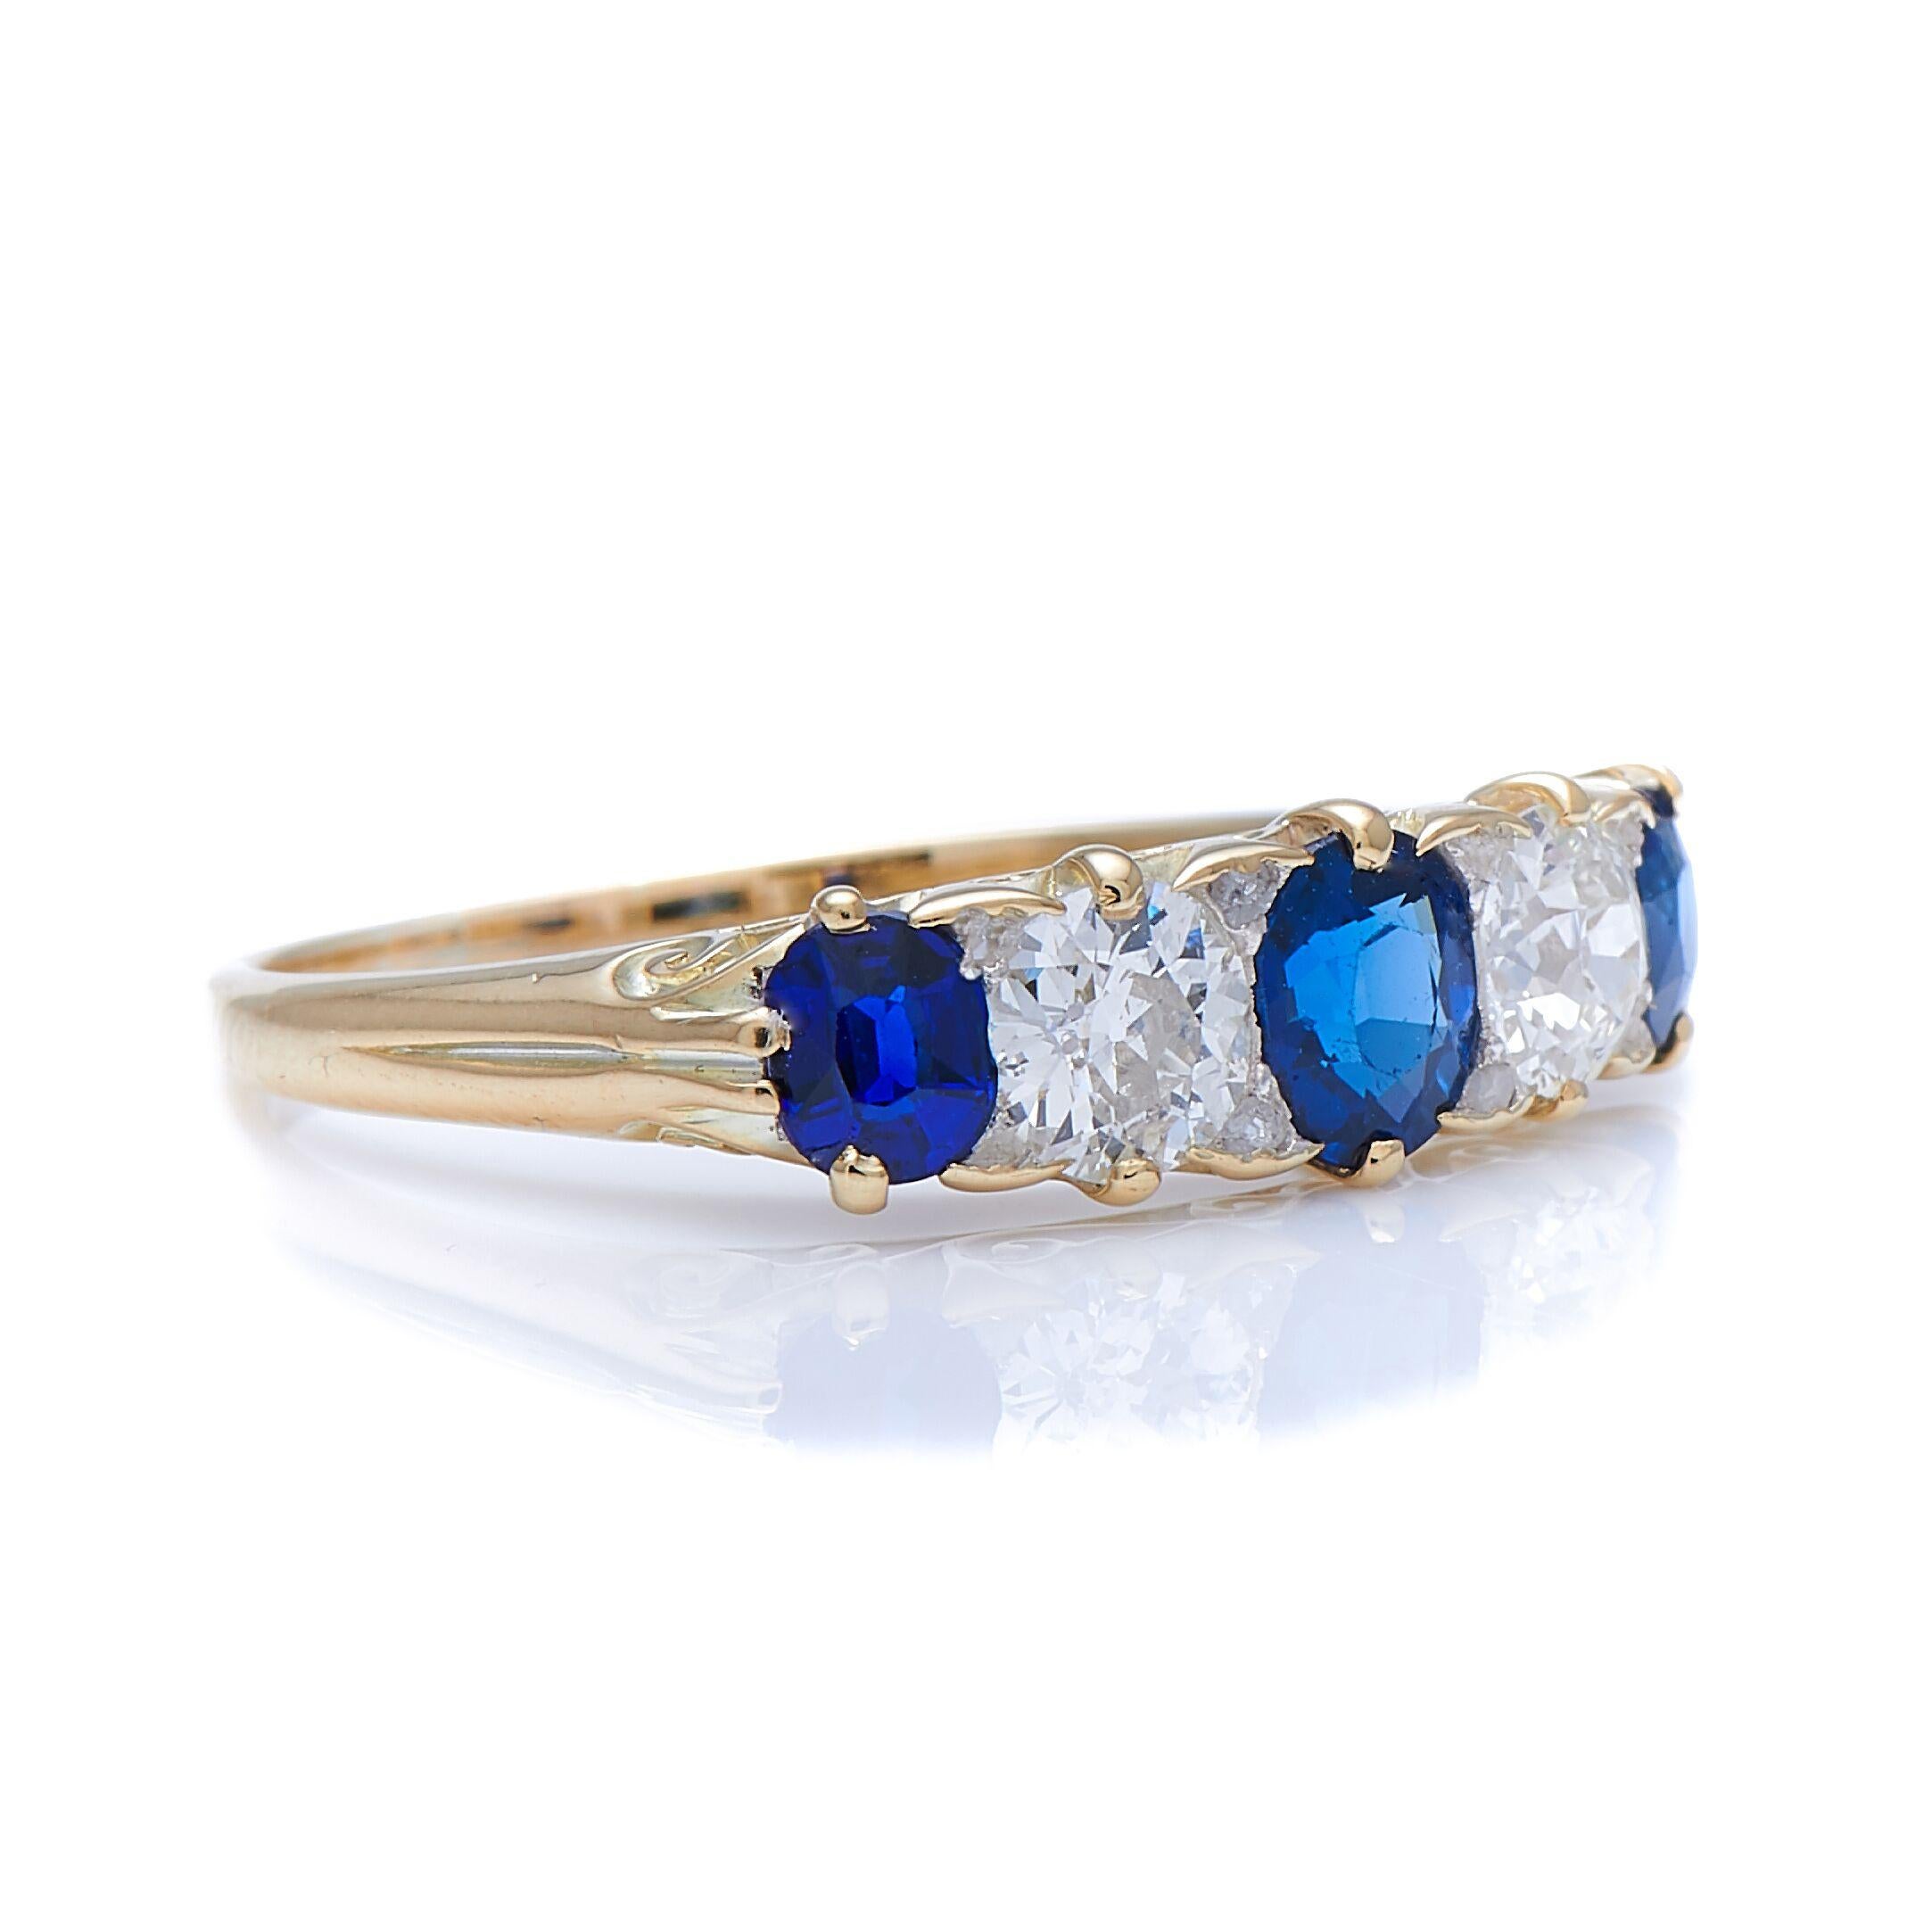 Diamond and sapphire ring, late 19th century. This classic five-stone ring is set with a well-matched sequence of deep blue sapphires and circular-cut diamonds, the junctions between thee stones cleverly filled with tiny rose diamonds. The metal